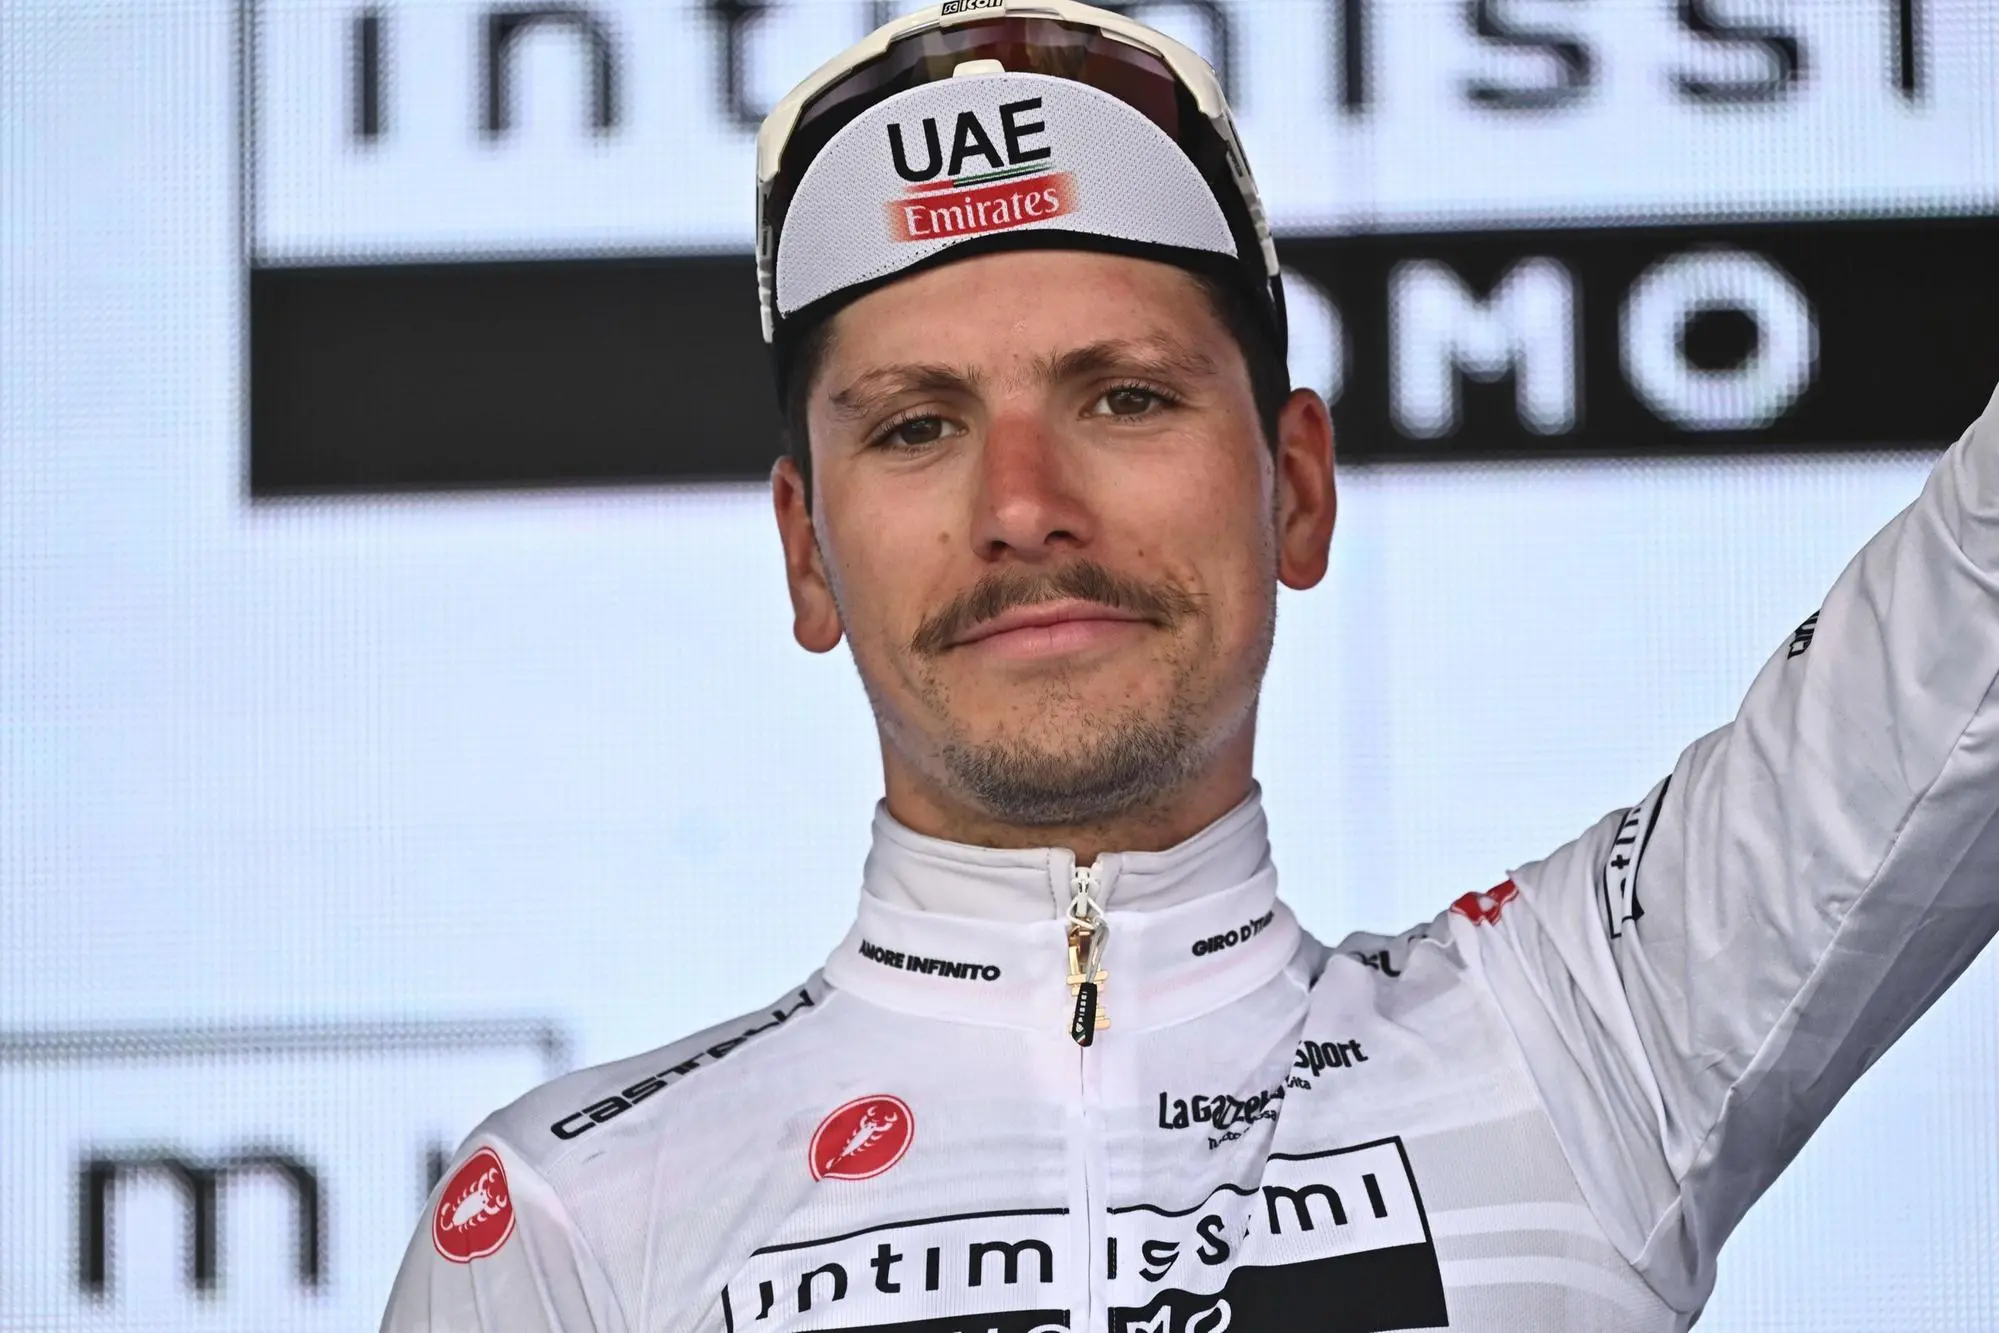 Portuguese rider Joao Almeida of Uae Emirates Team wearing the best young rider's white jersey celebrate on the podium after fifteenth stage of the 2023 Giro d'Italia cycling race over 195 km from Seregno to Bergamo, Italy, 21 May 2023. ANSA/LUCA ZENNARO